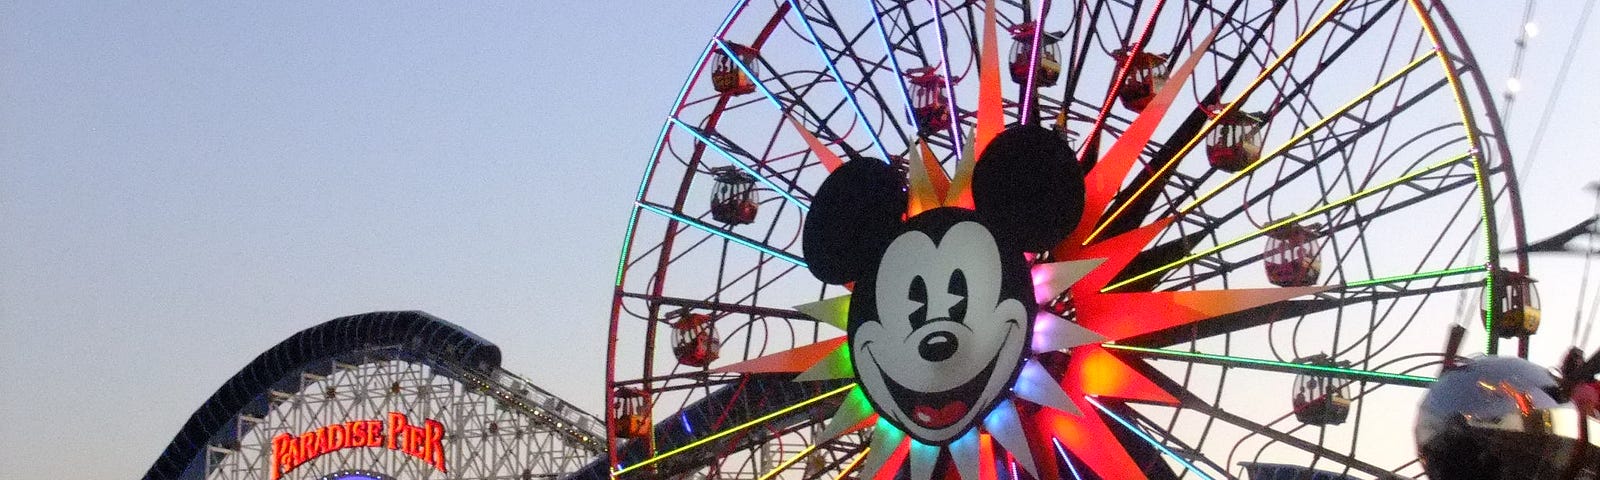 A giant Ferris wheel decorated with Mickey Mouse’s face. A rollercoaster is in the background.